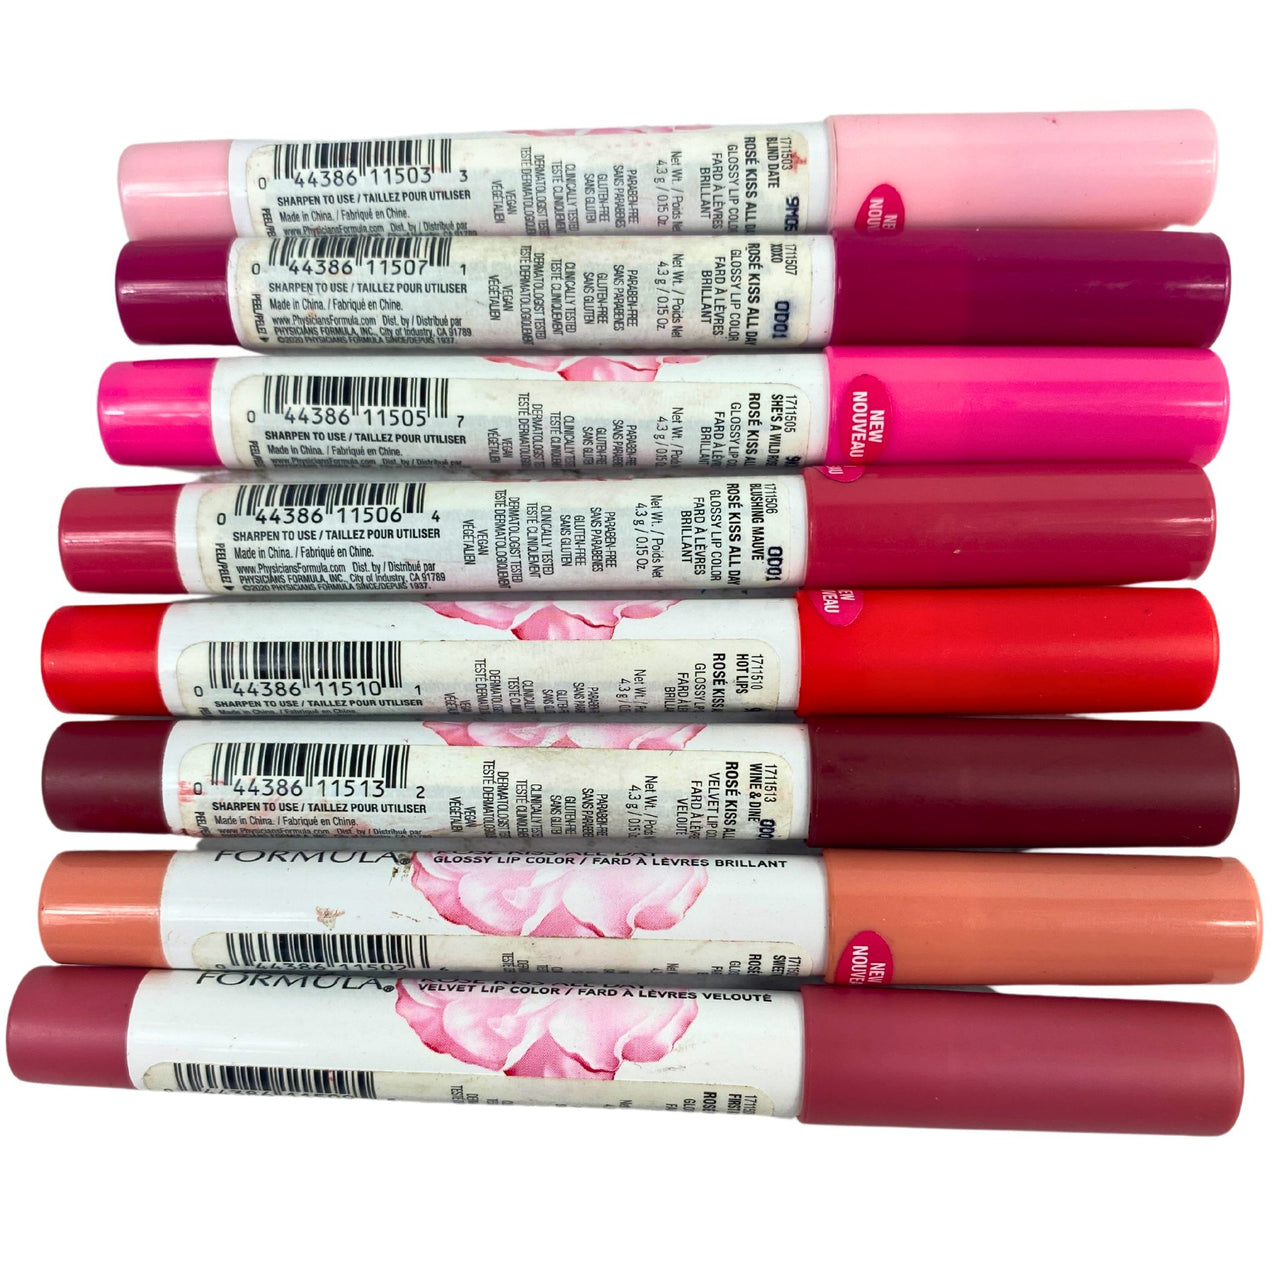 Physicians Formula Rose Kiss All Day Velvet & Glossy Lip Color Assorted Mix 